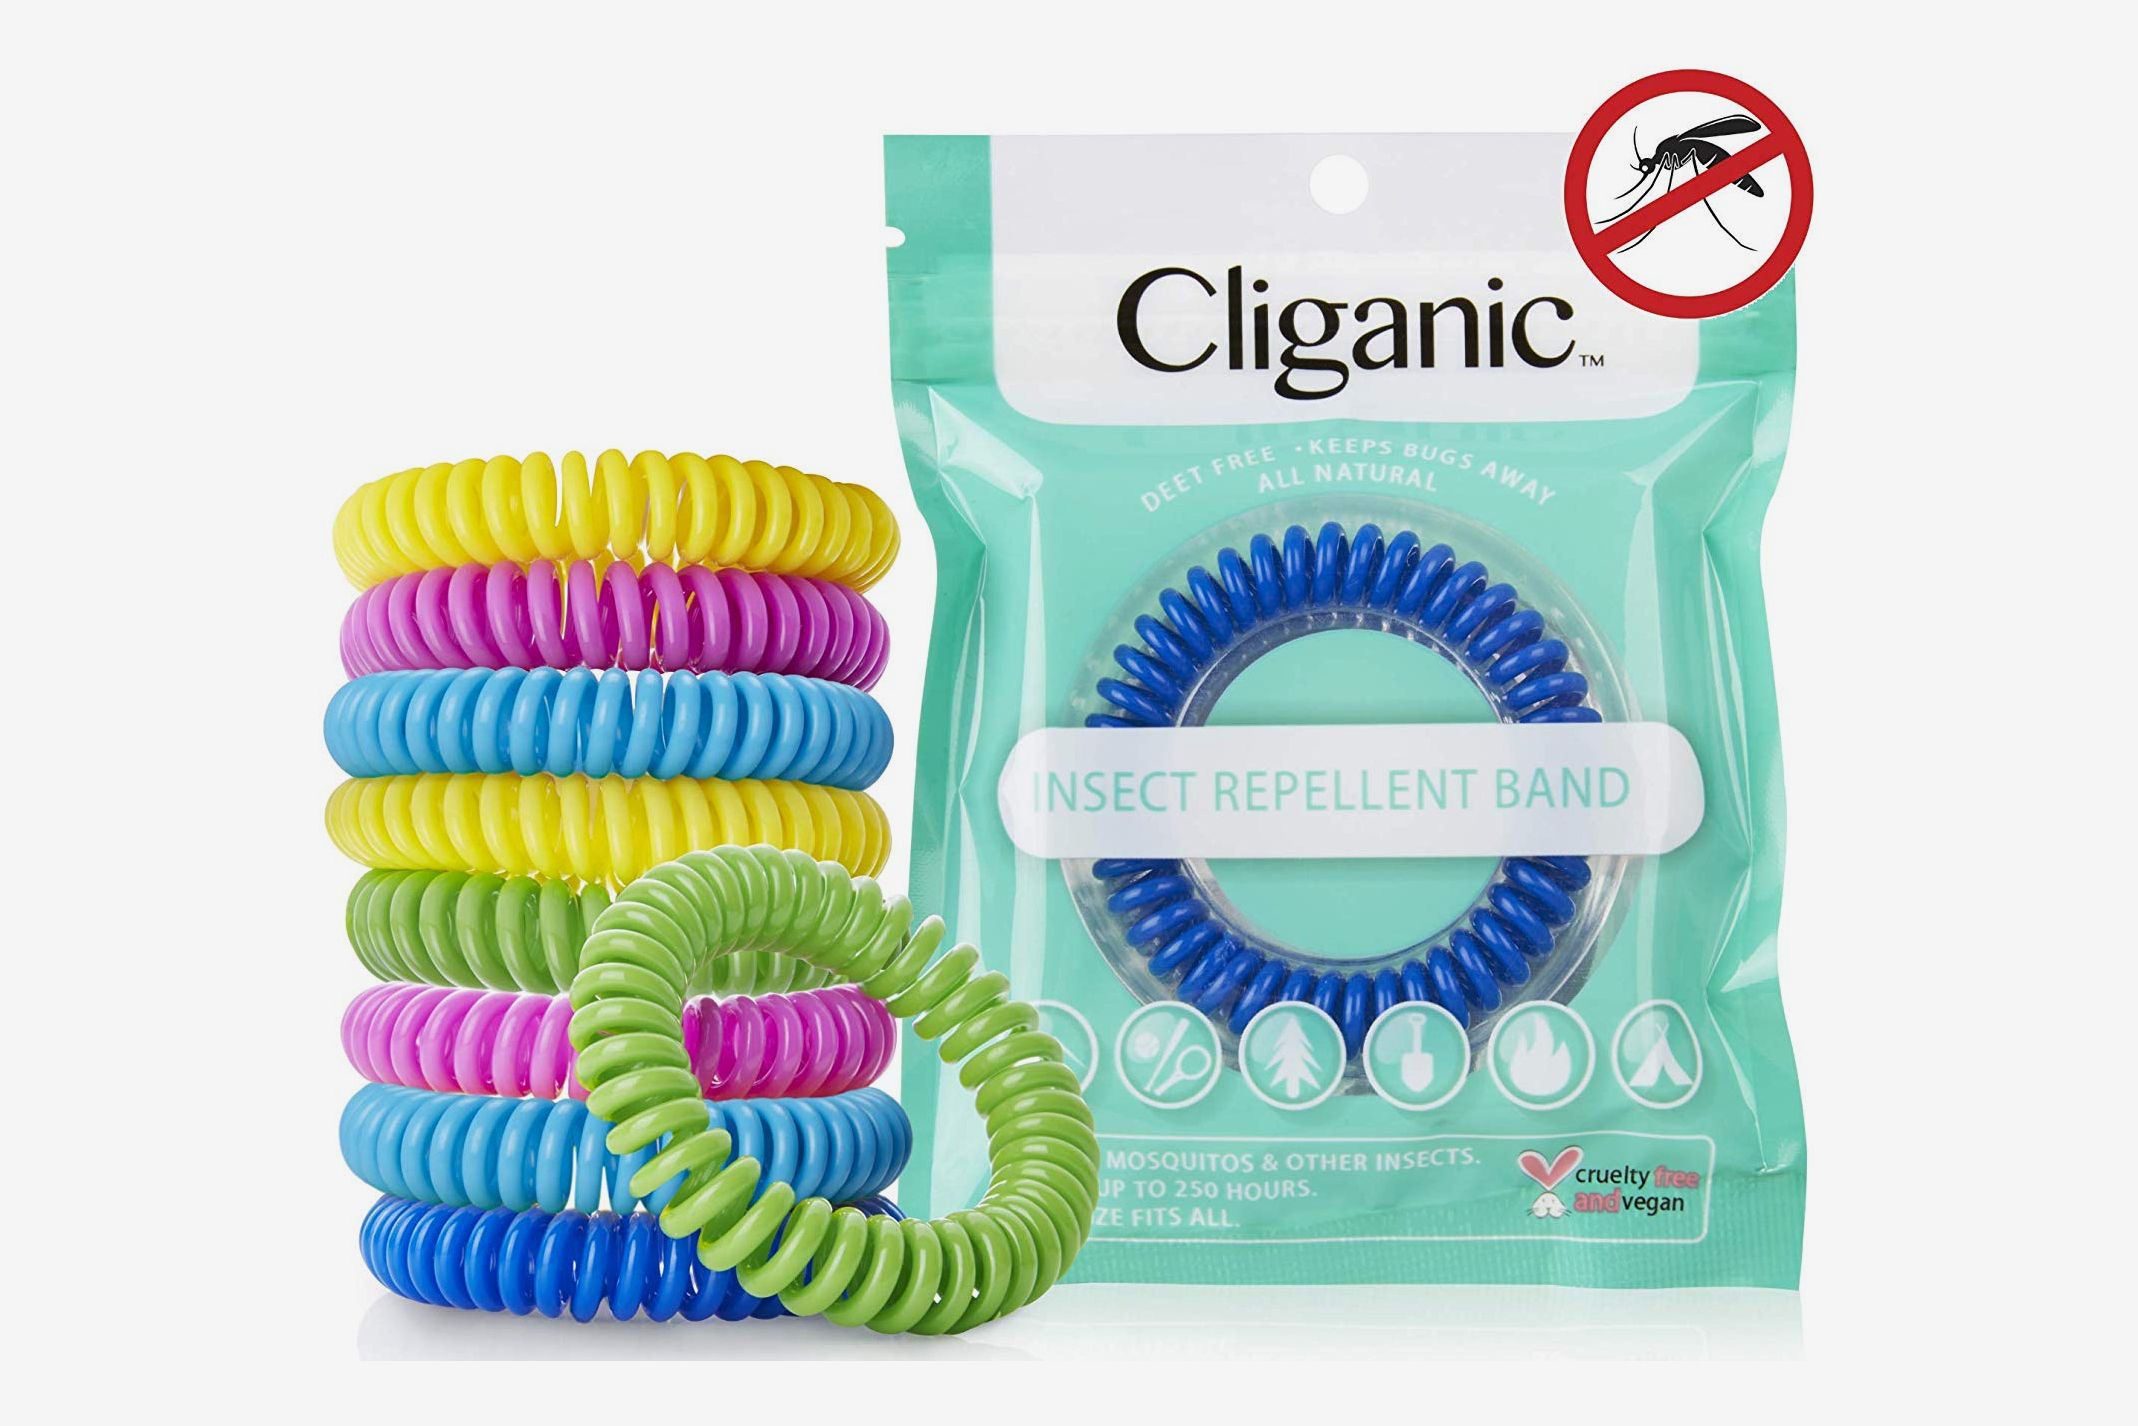 Yithings Mosquito Repellent Bracelet 15 Pack Outdoor Waterproof Insect Repellent Bracelets Safe Made With Natural Plant Oils for Kids & Adults Perfect Camping Hiking